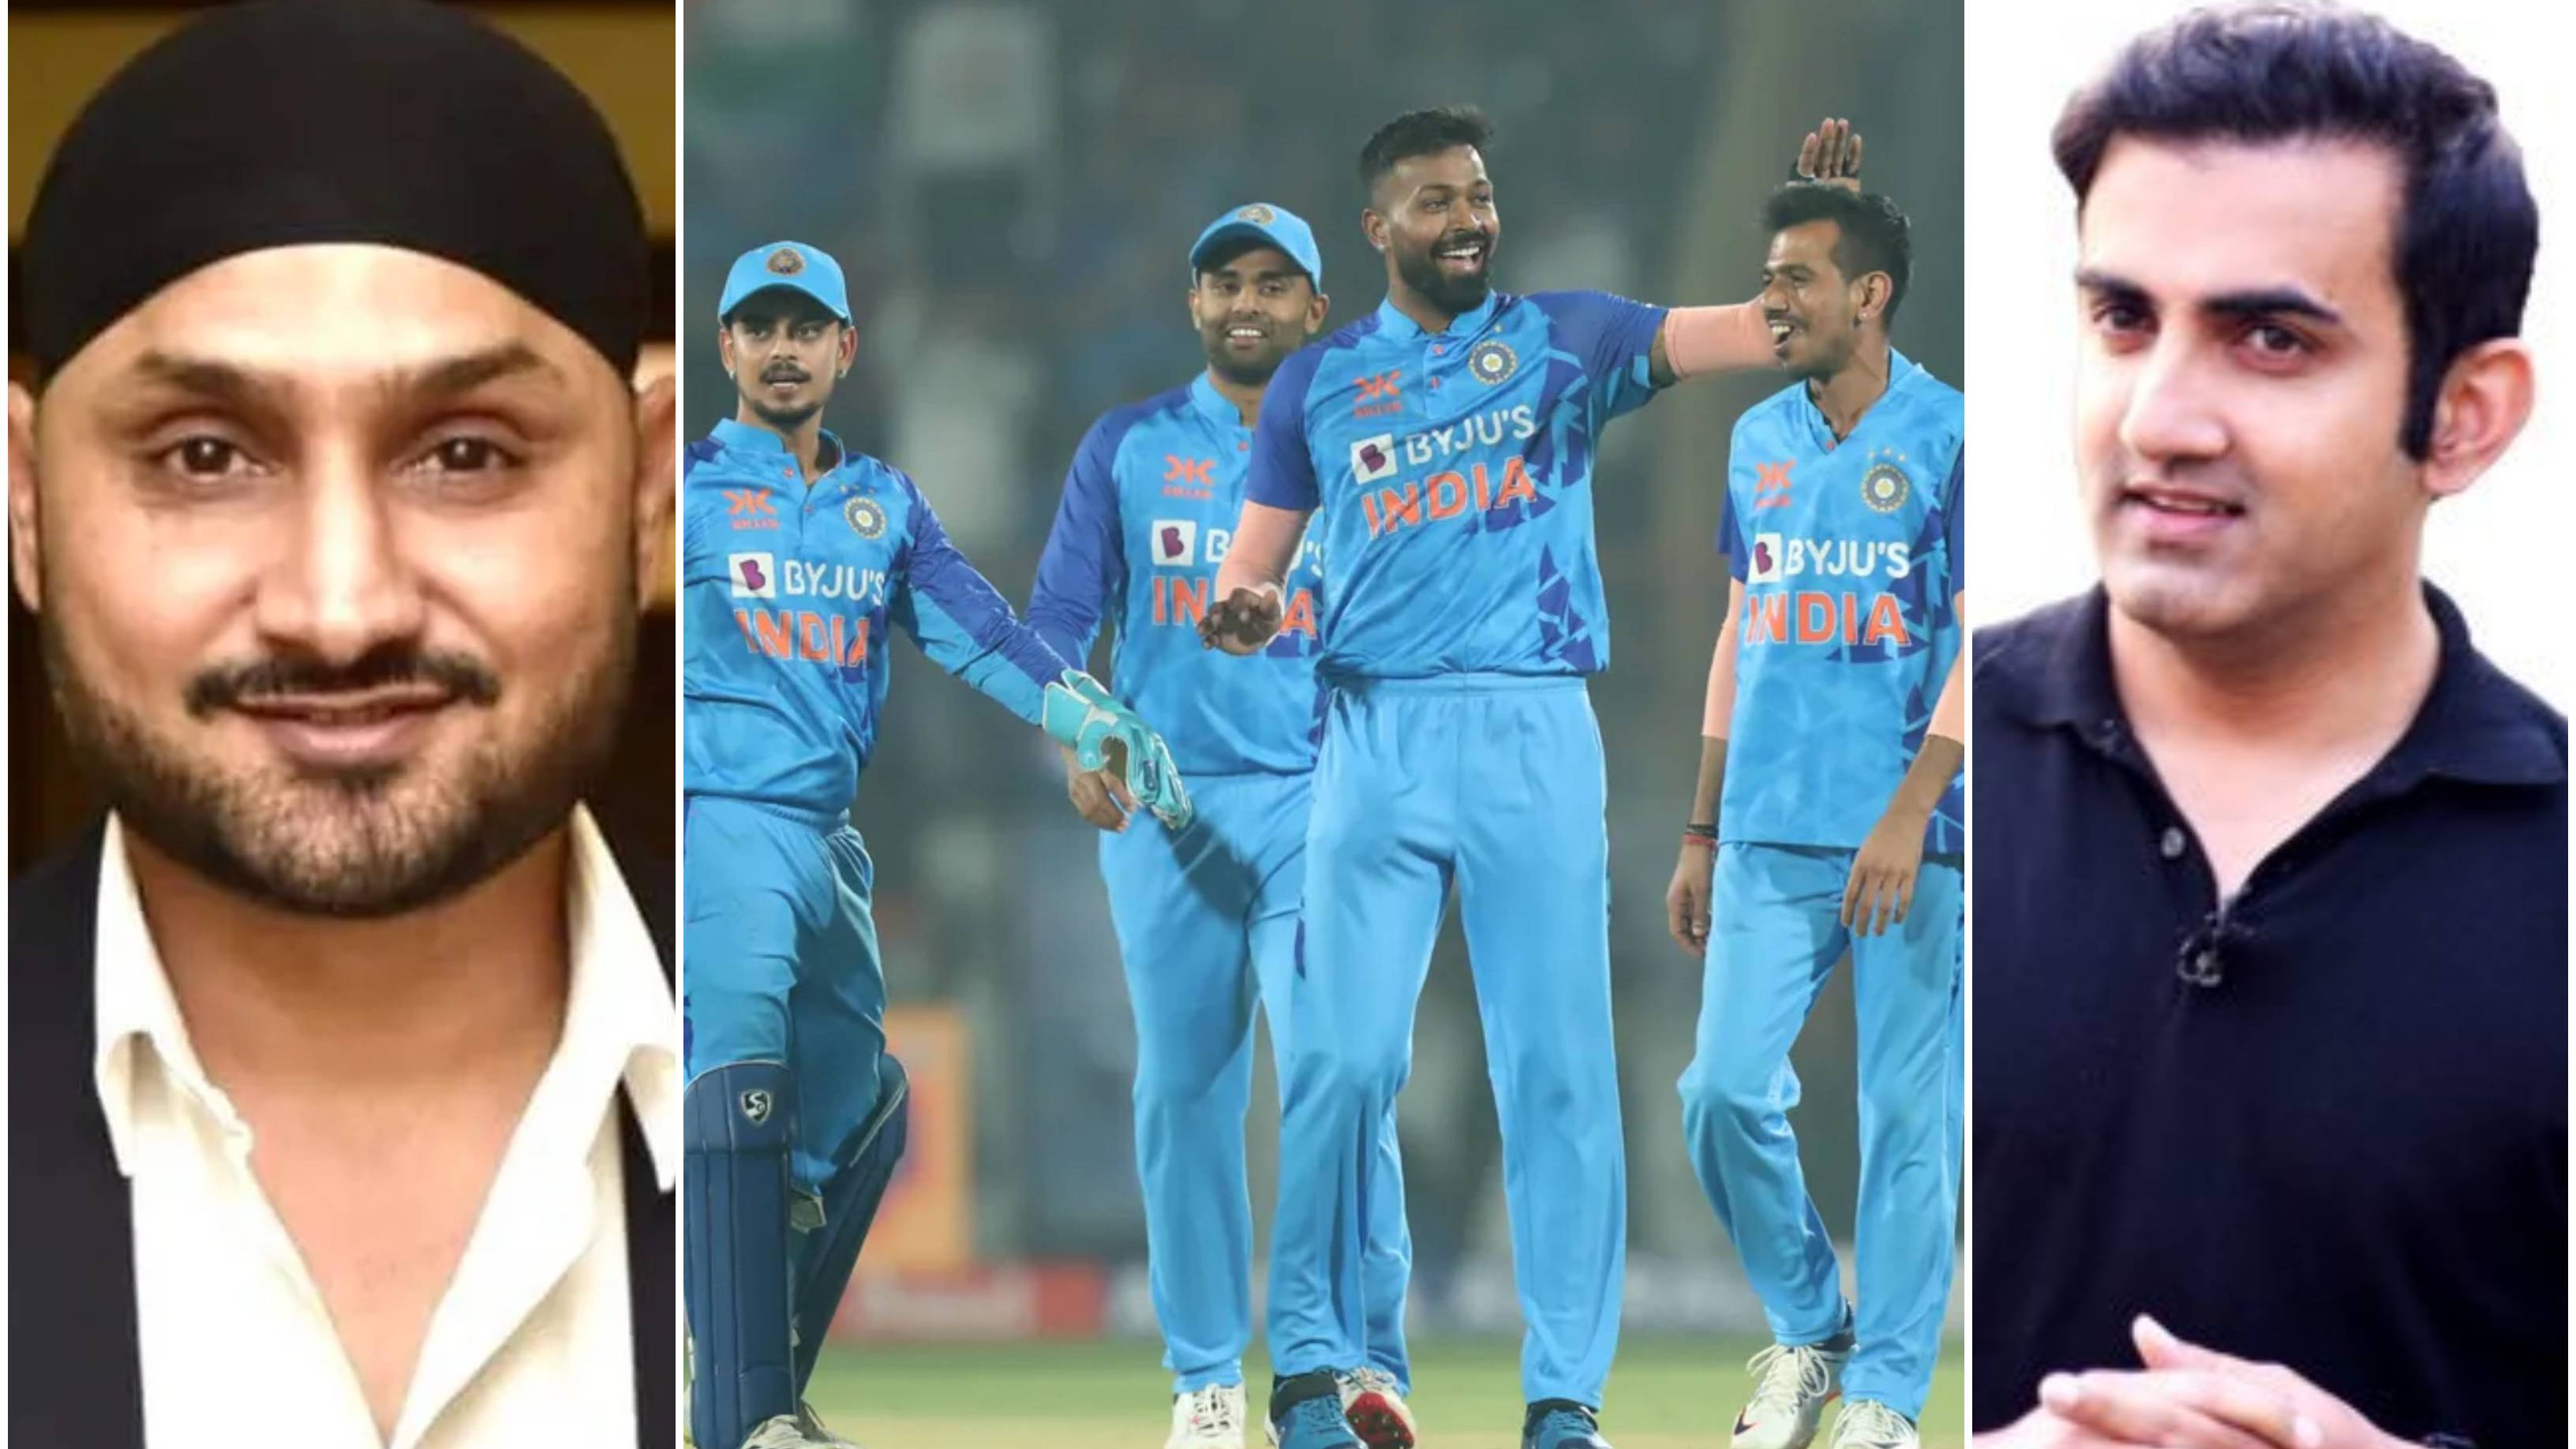 IND v SL 2023: Cricket fraternity reacts as India outclass Sri Lanka in 3rd T20I to clinch the series 2-1